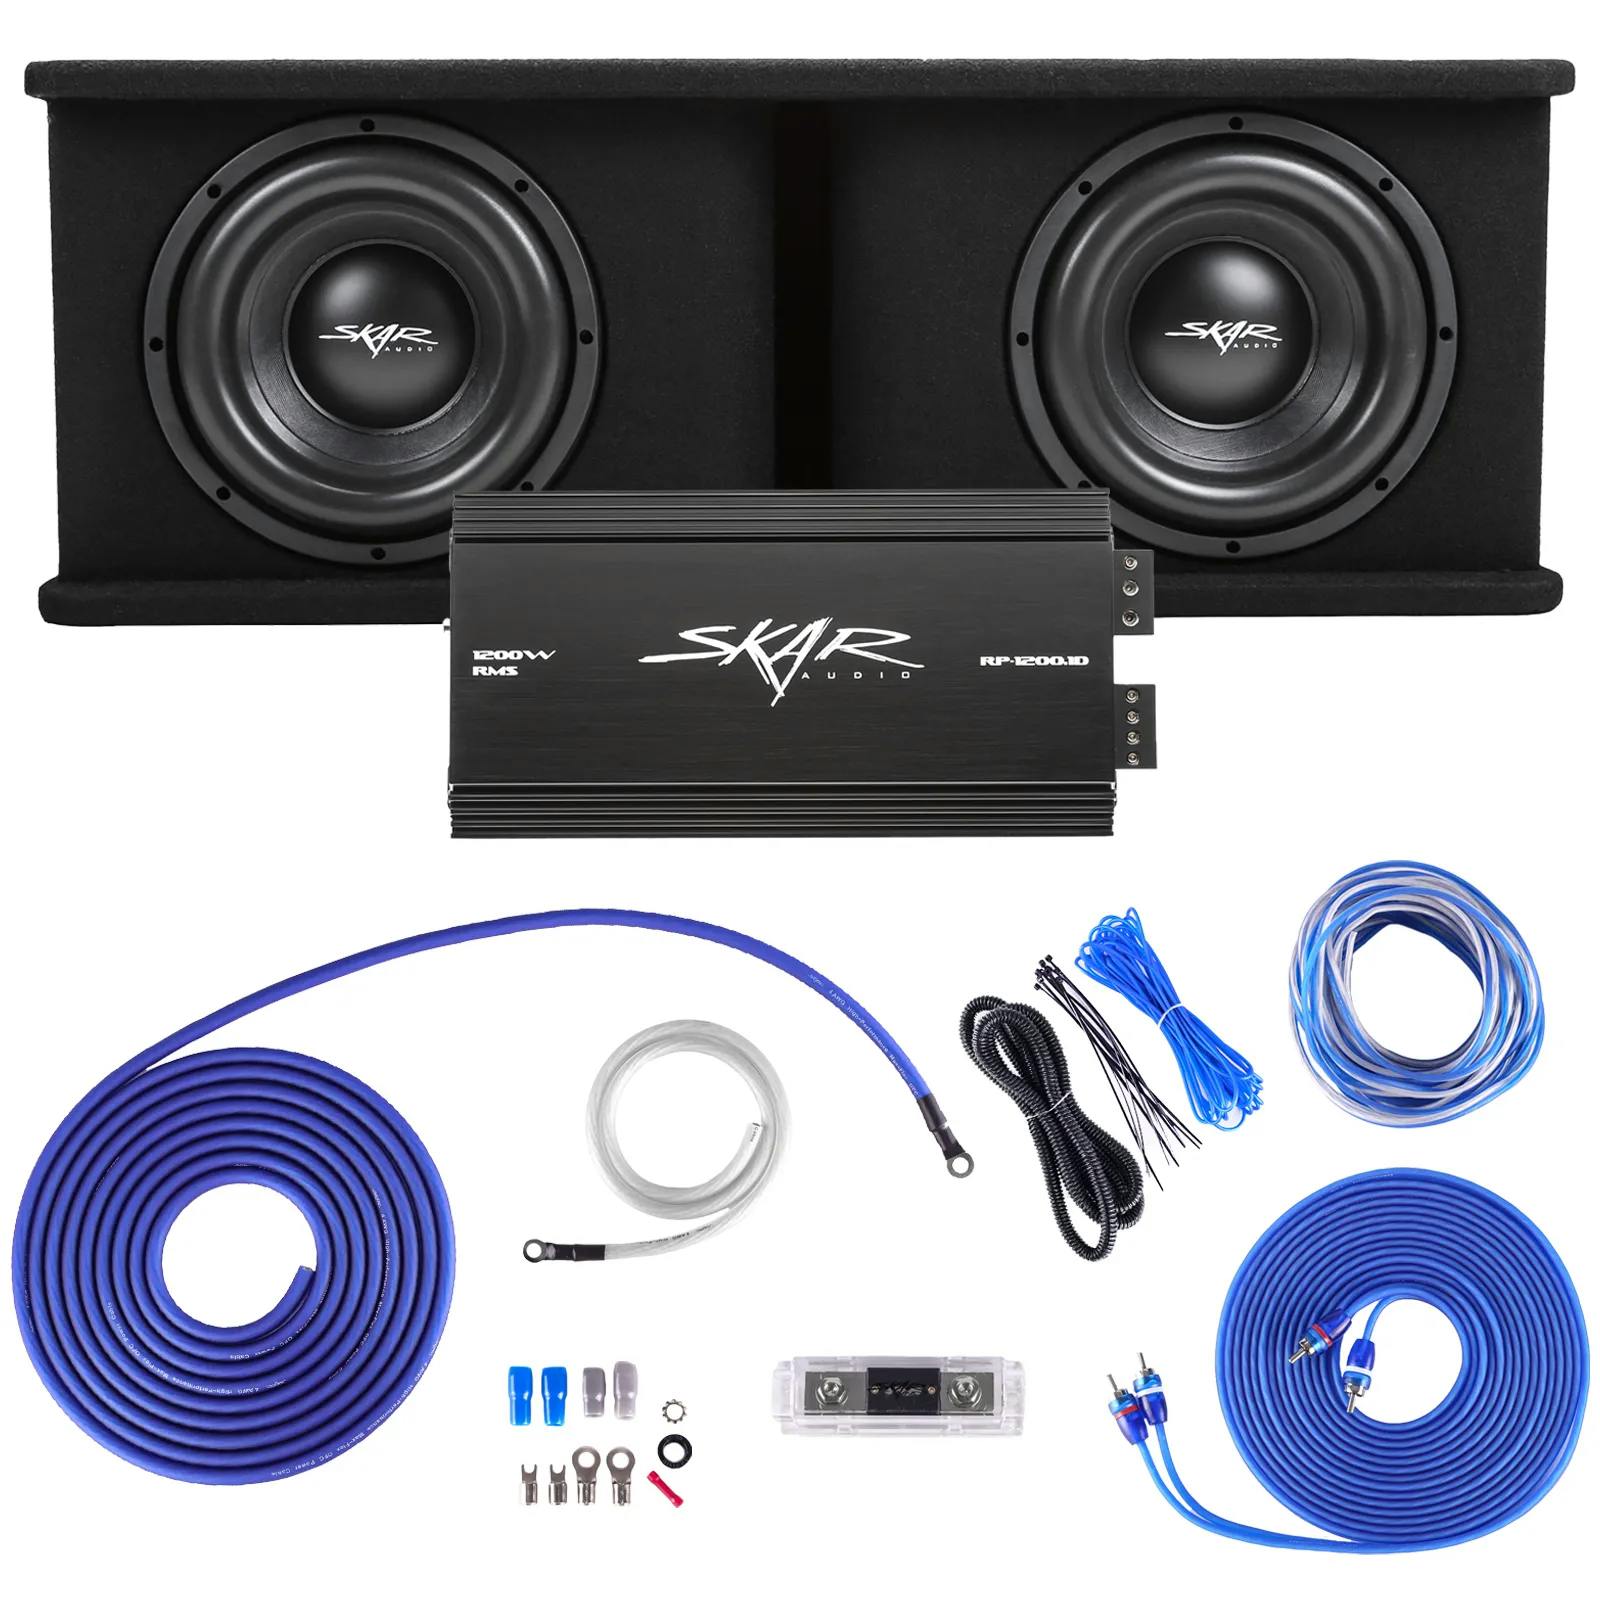 Featured Product Photo for Dual 10" 2,400 Watt SDR Series Complete Subwoofer Package with Vented Enclosure and Amplifier